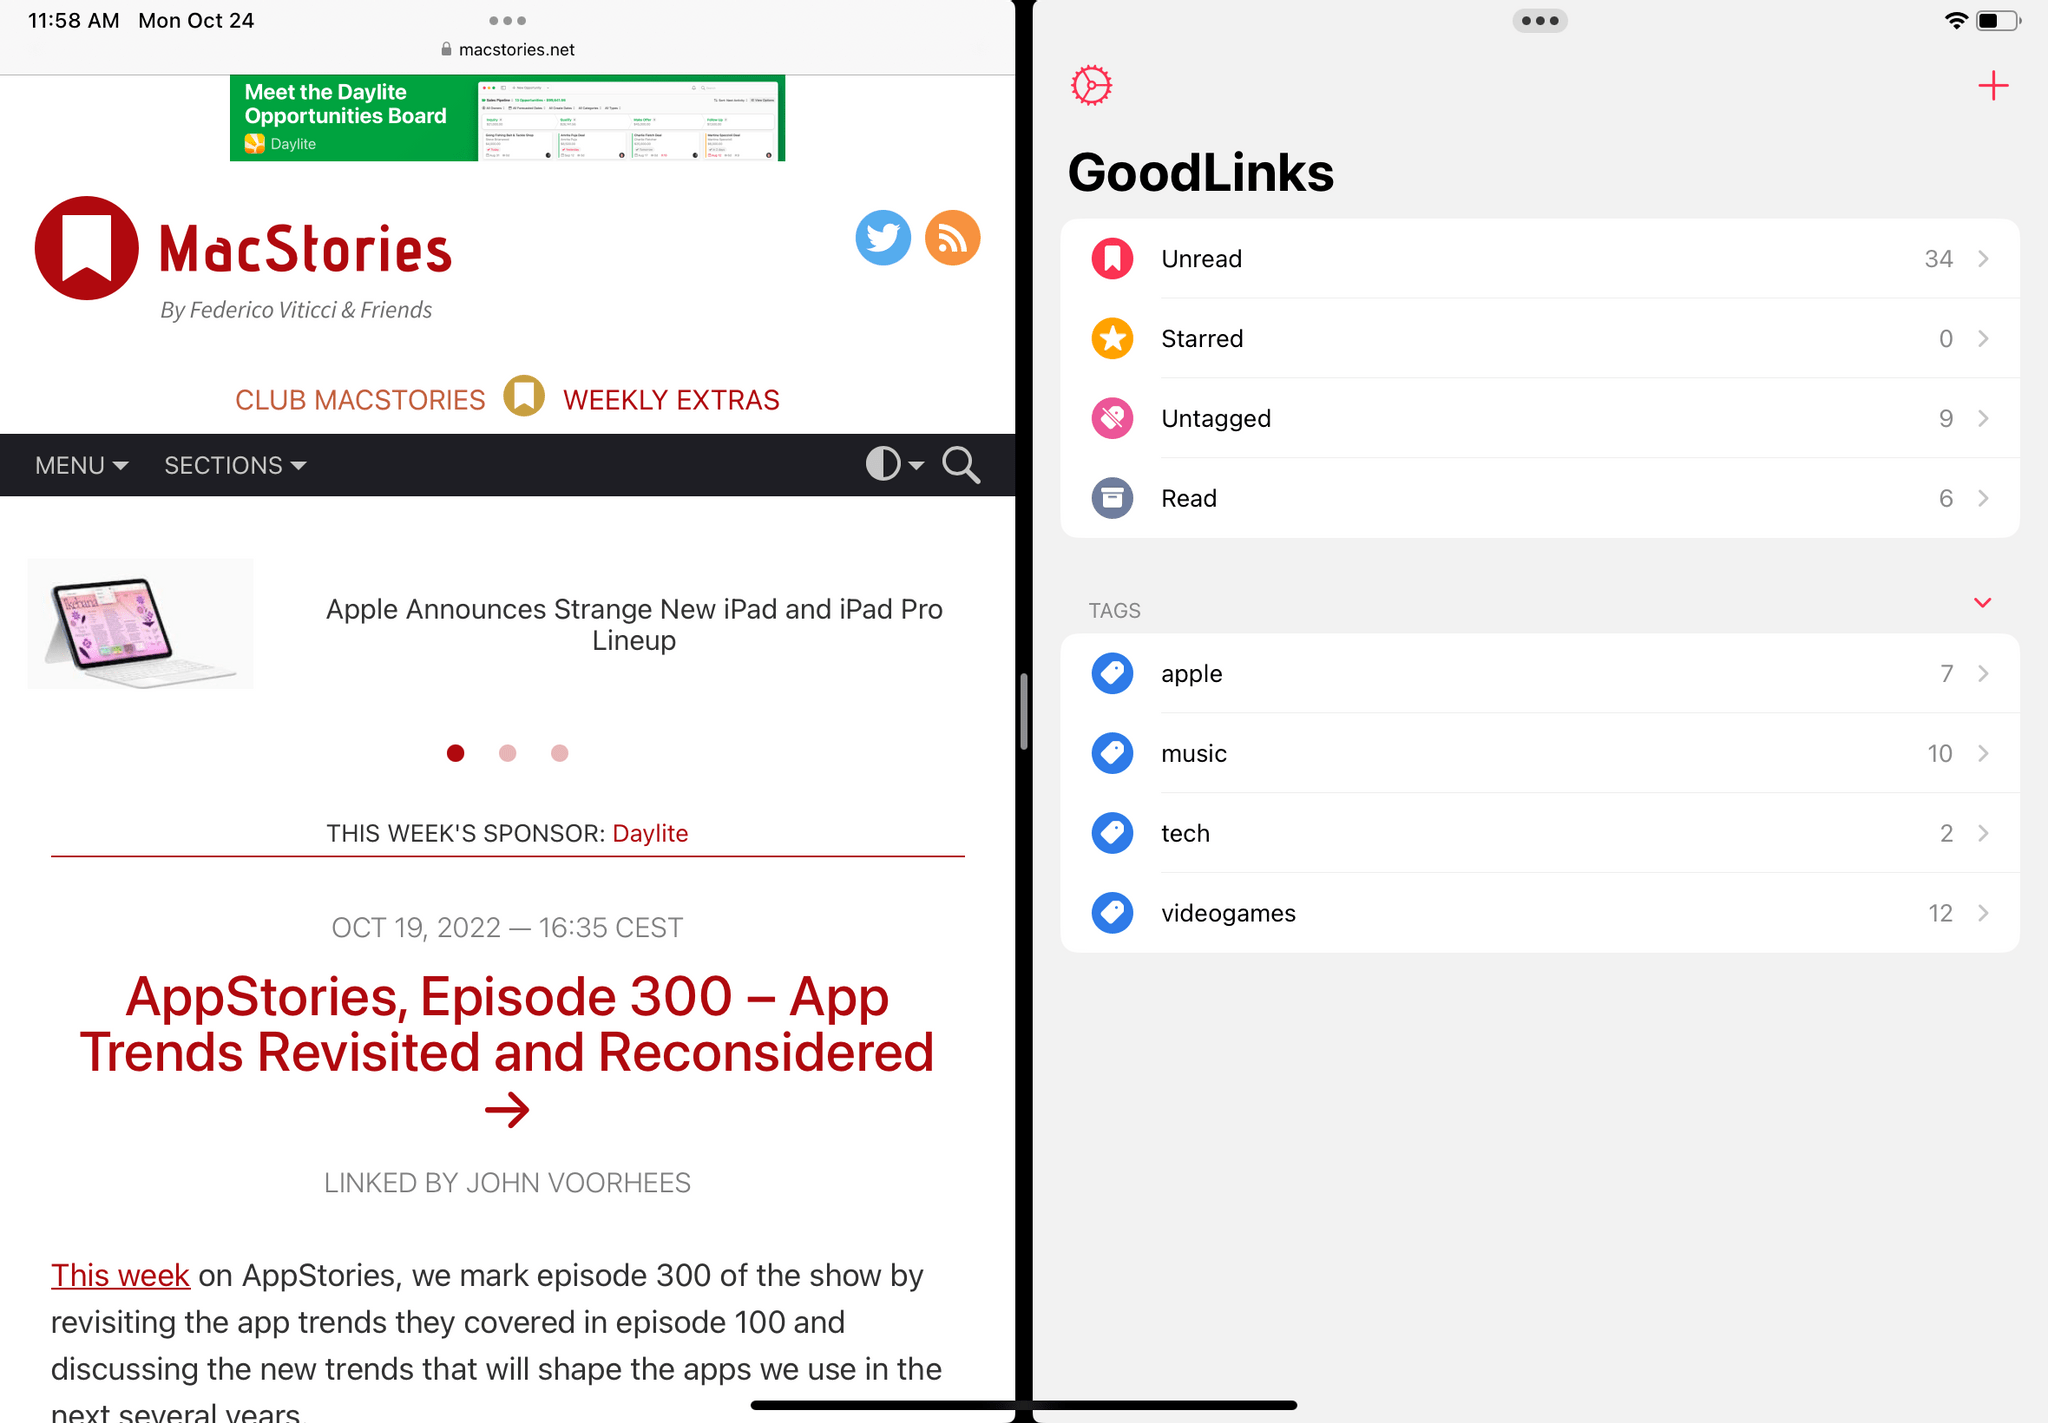 Because the new iPad does not support display scaling, the same Split View cannot show a sidebar for GoodLinks on the right, and Safari (left) shows less text.